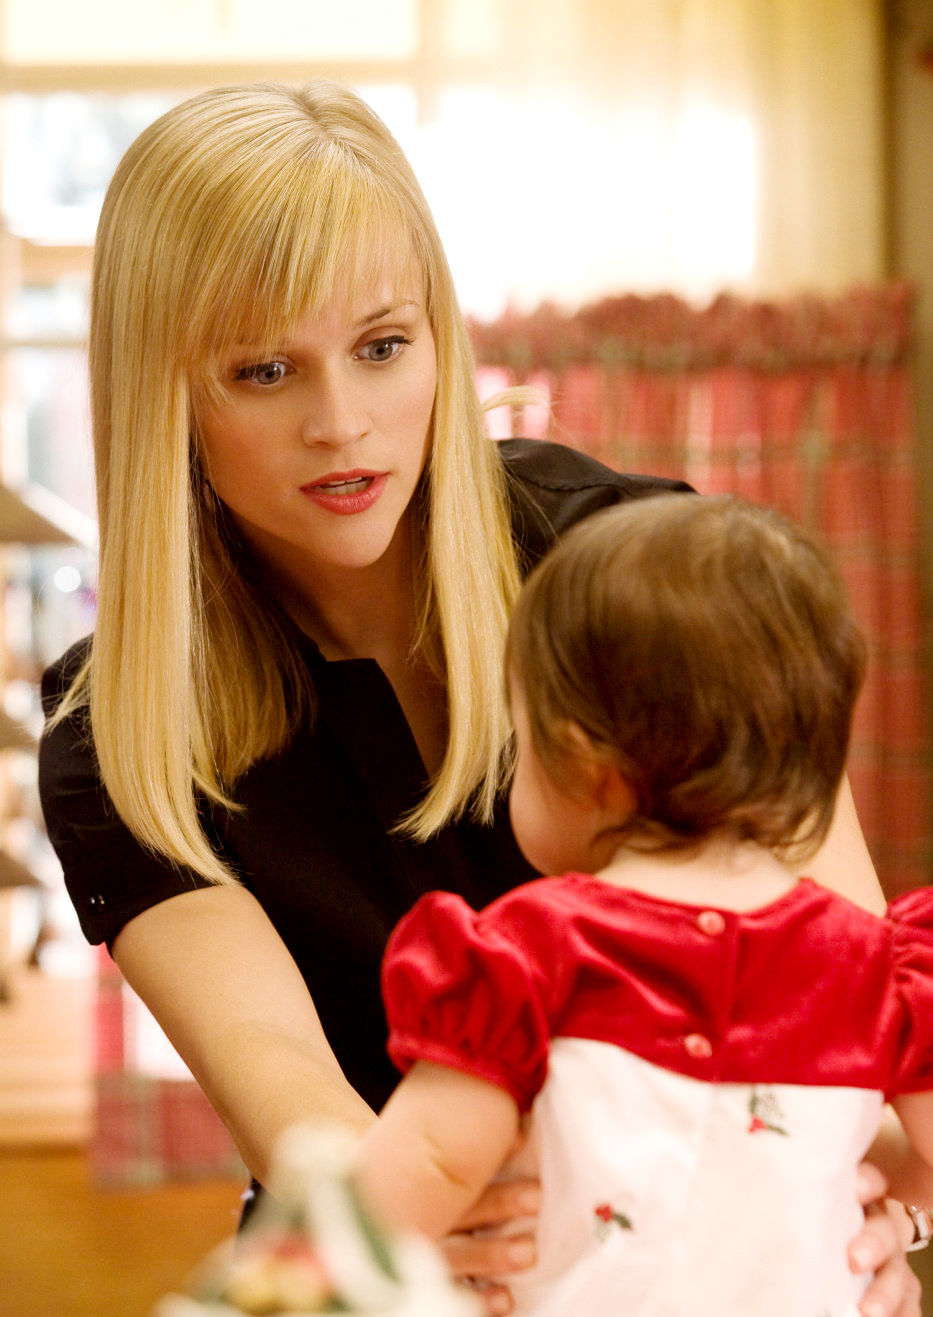 Reese Witherspoon stars as Kate in New Line Cinema's Four Christmases (2008)